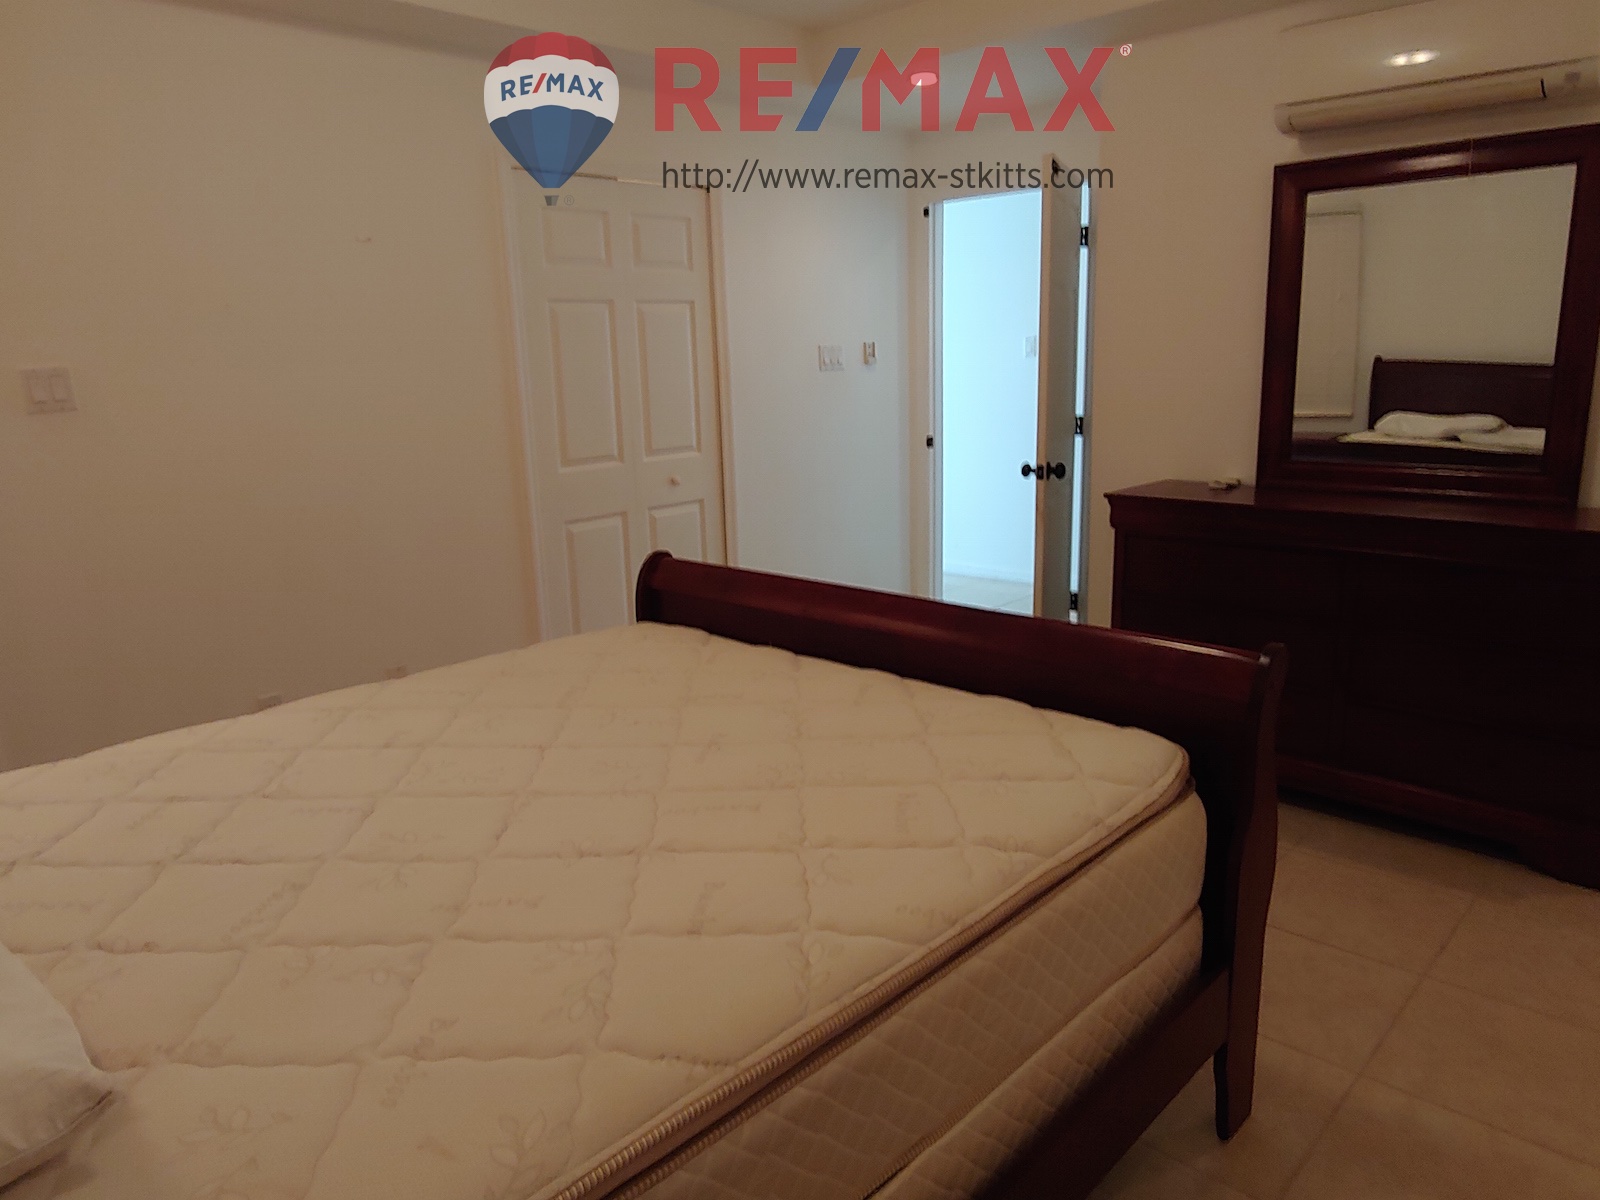 Third view of third bedroom of Great Investment opportunity! Manor by the Sea 3 bedroom 3 bathroom condo for sale St. Kitts